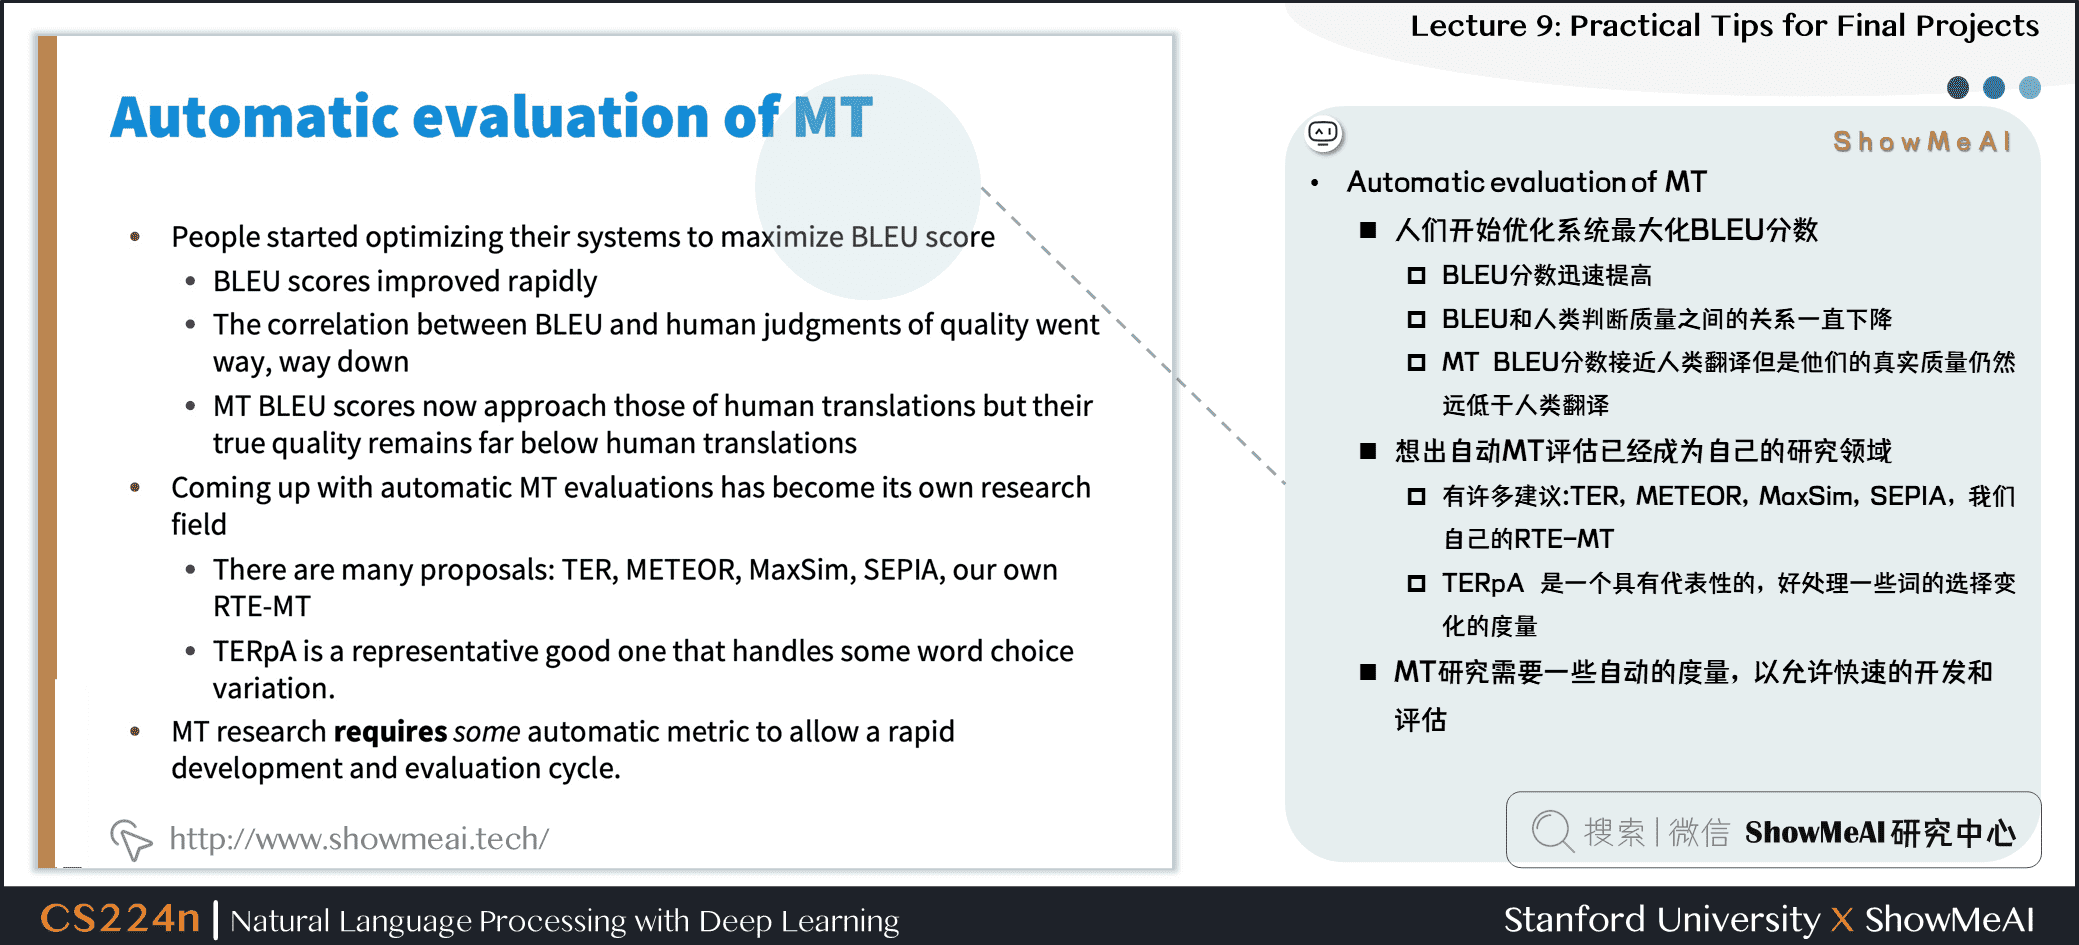 Automatic evaluation of MT